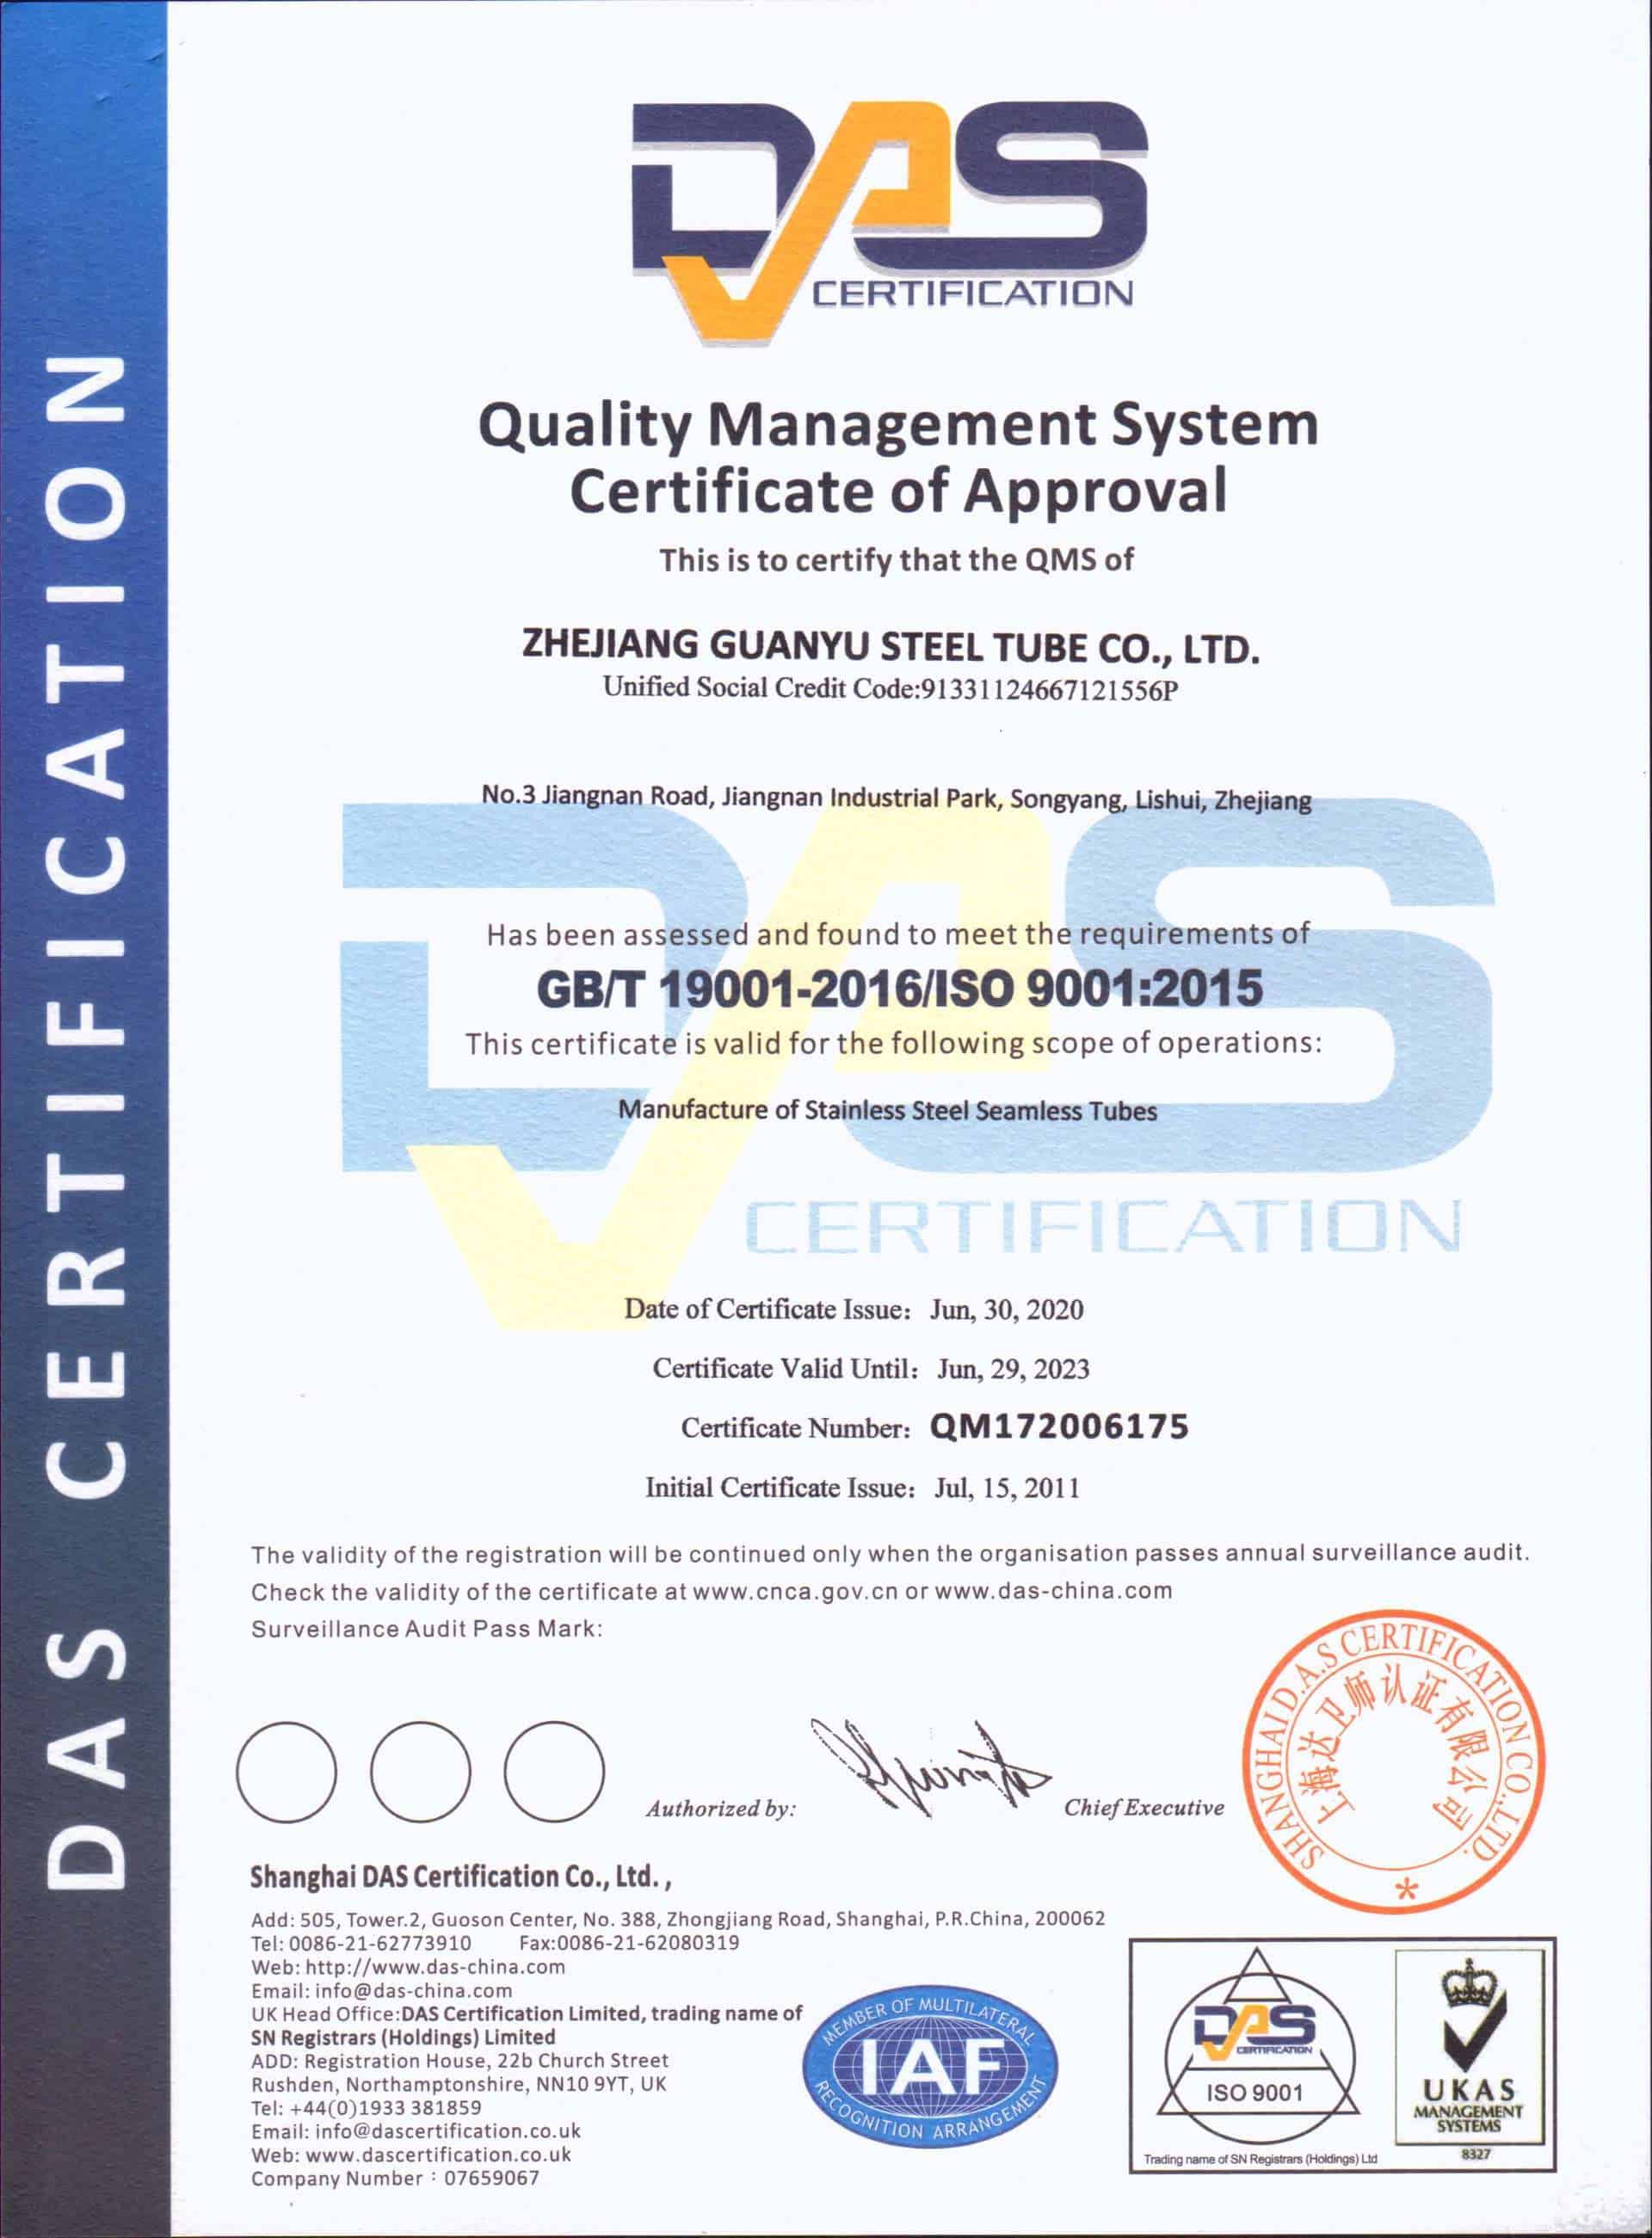 Qualification and Certification of Guanyu Steel Tube